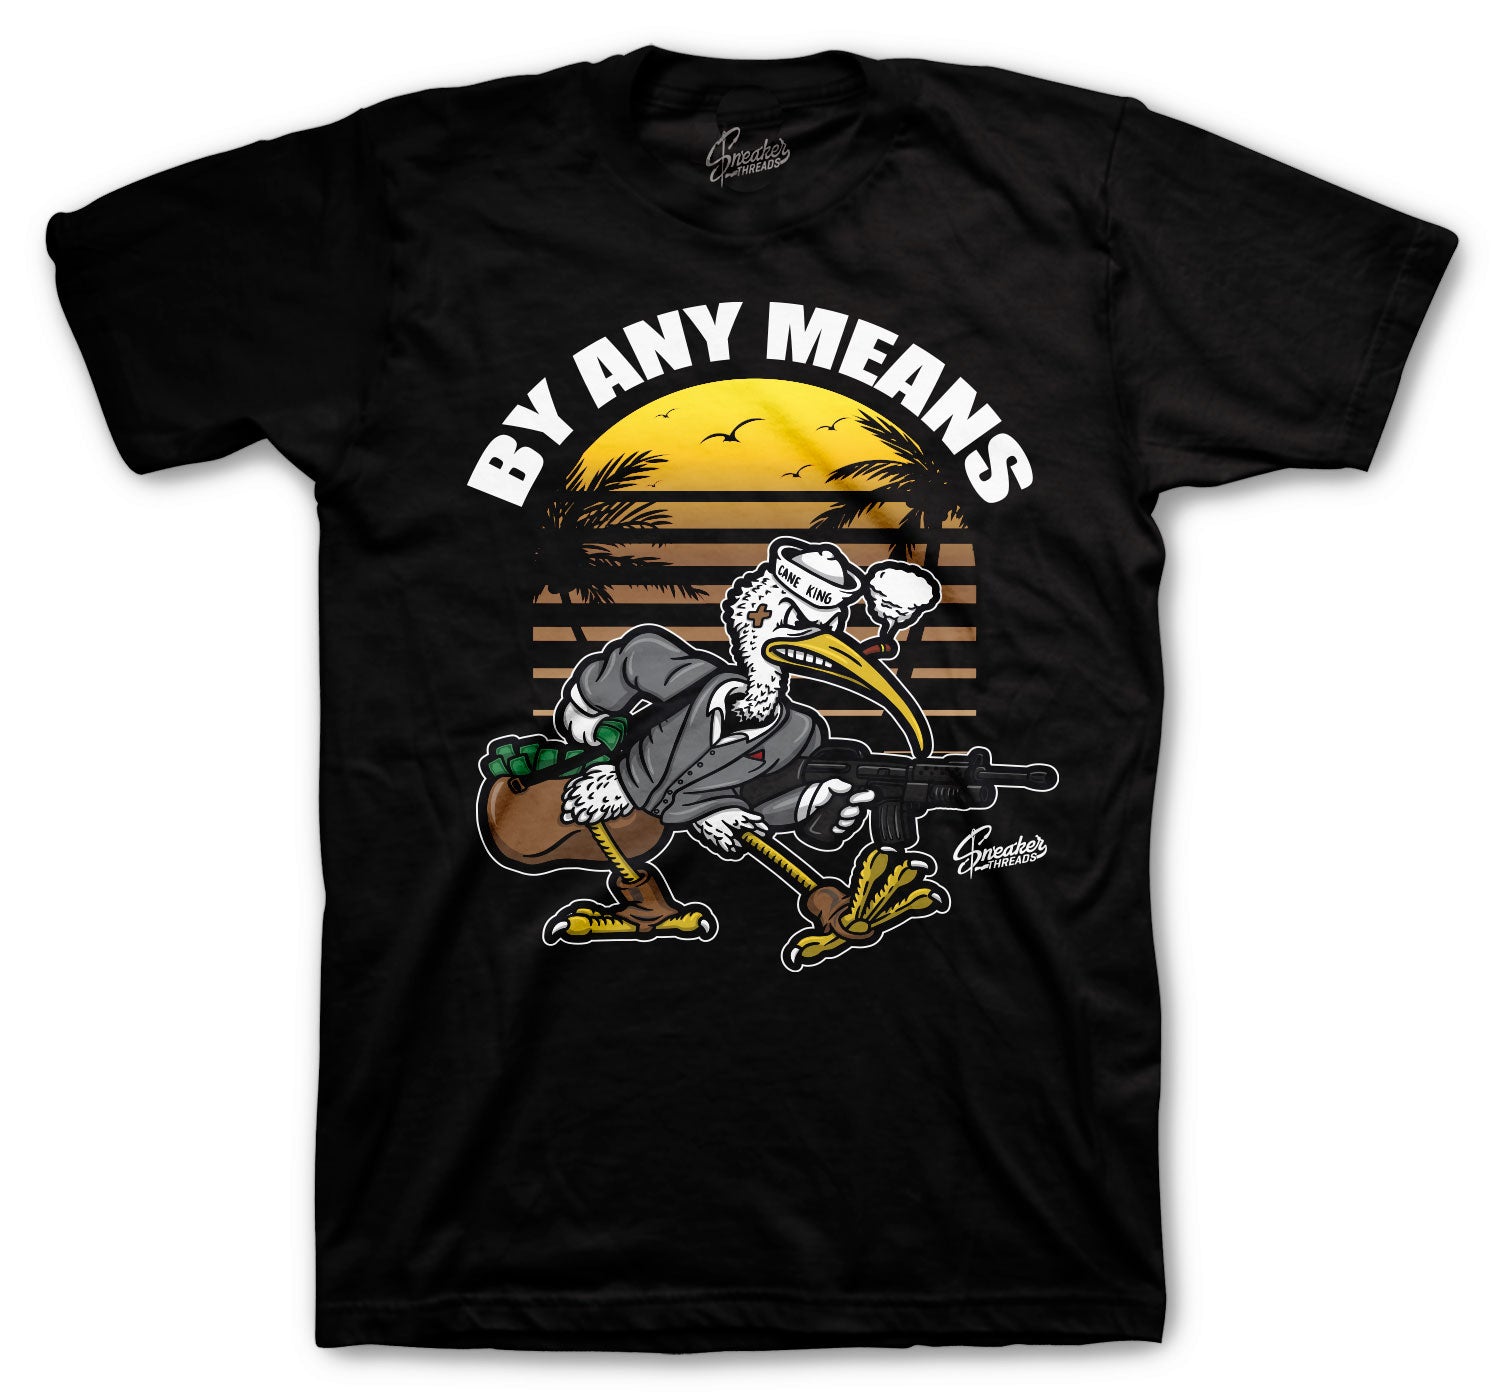 350 Mx Rock Shirt - By all Means - Black